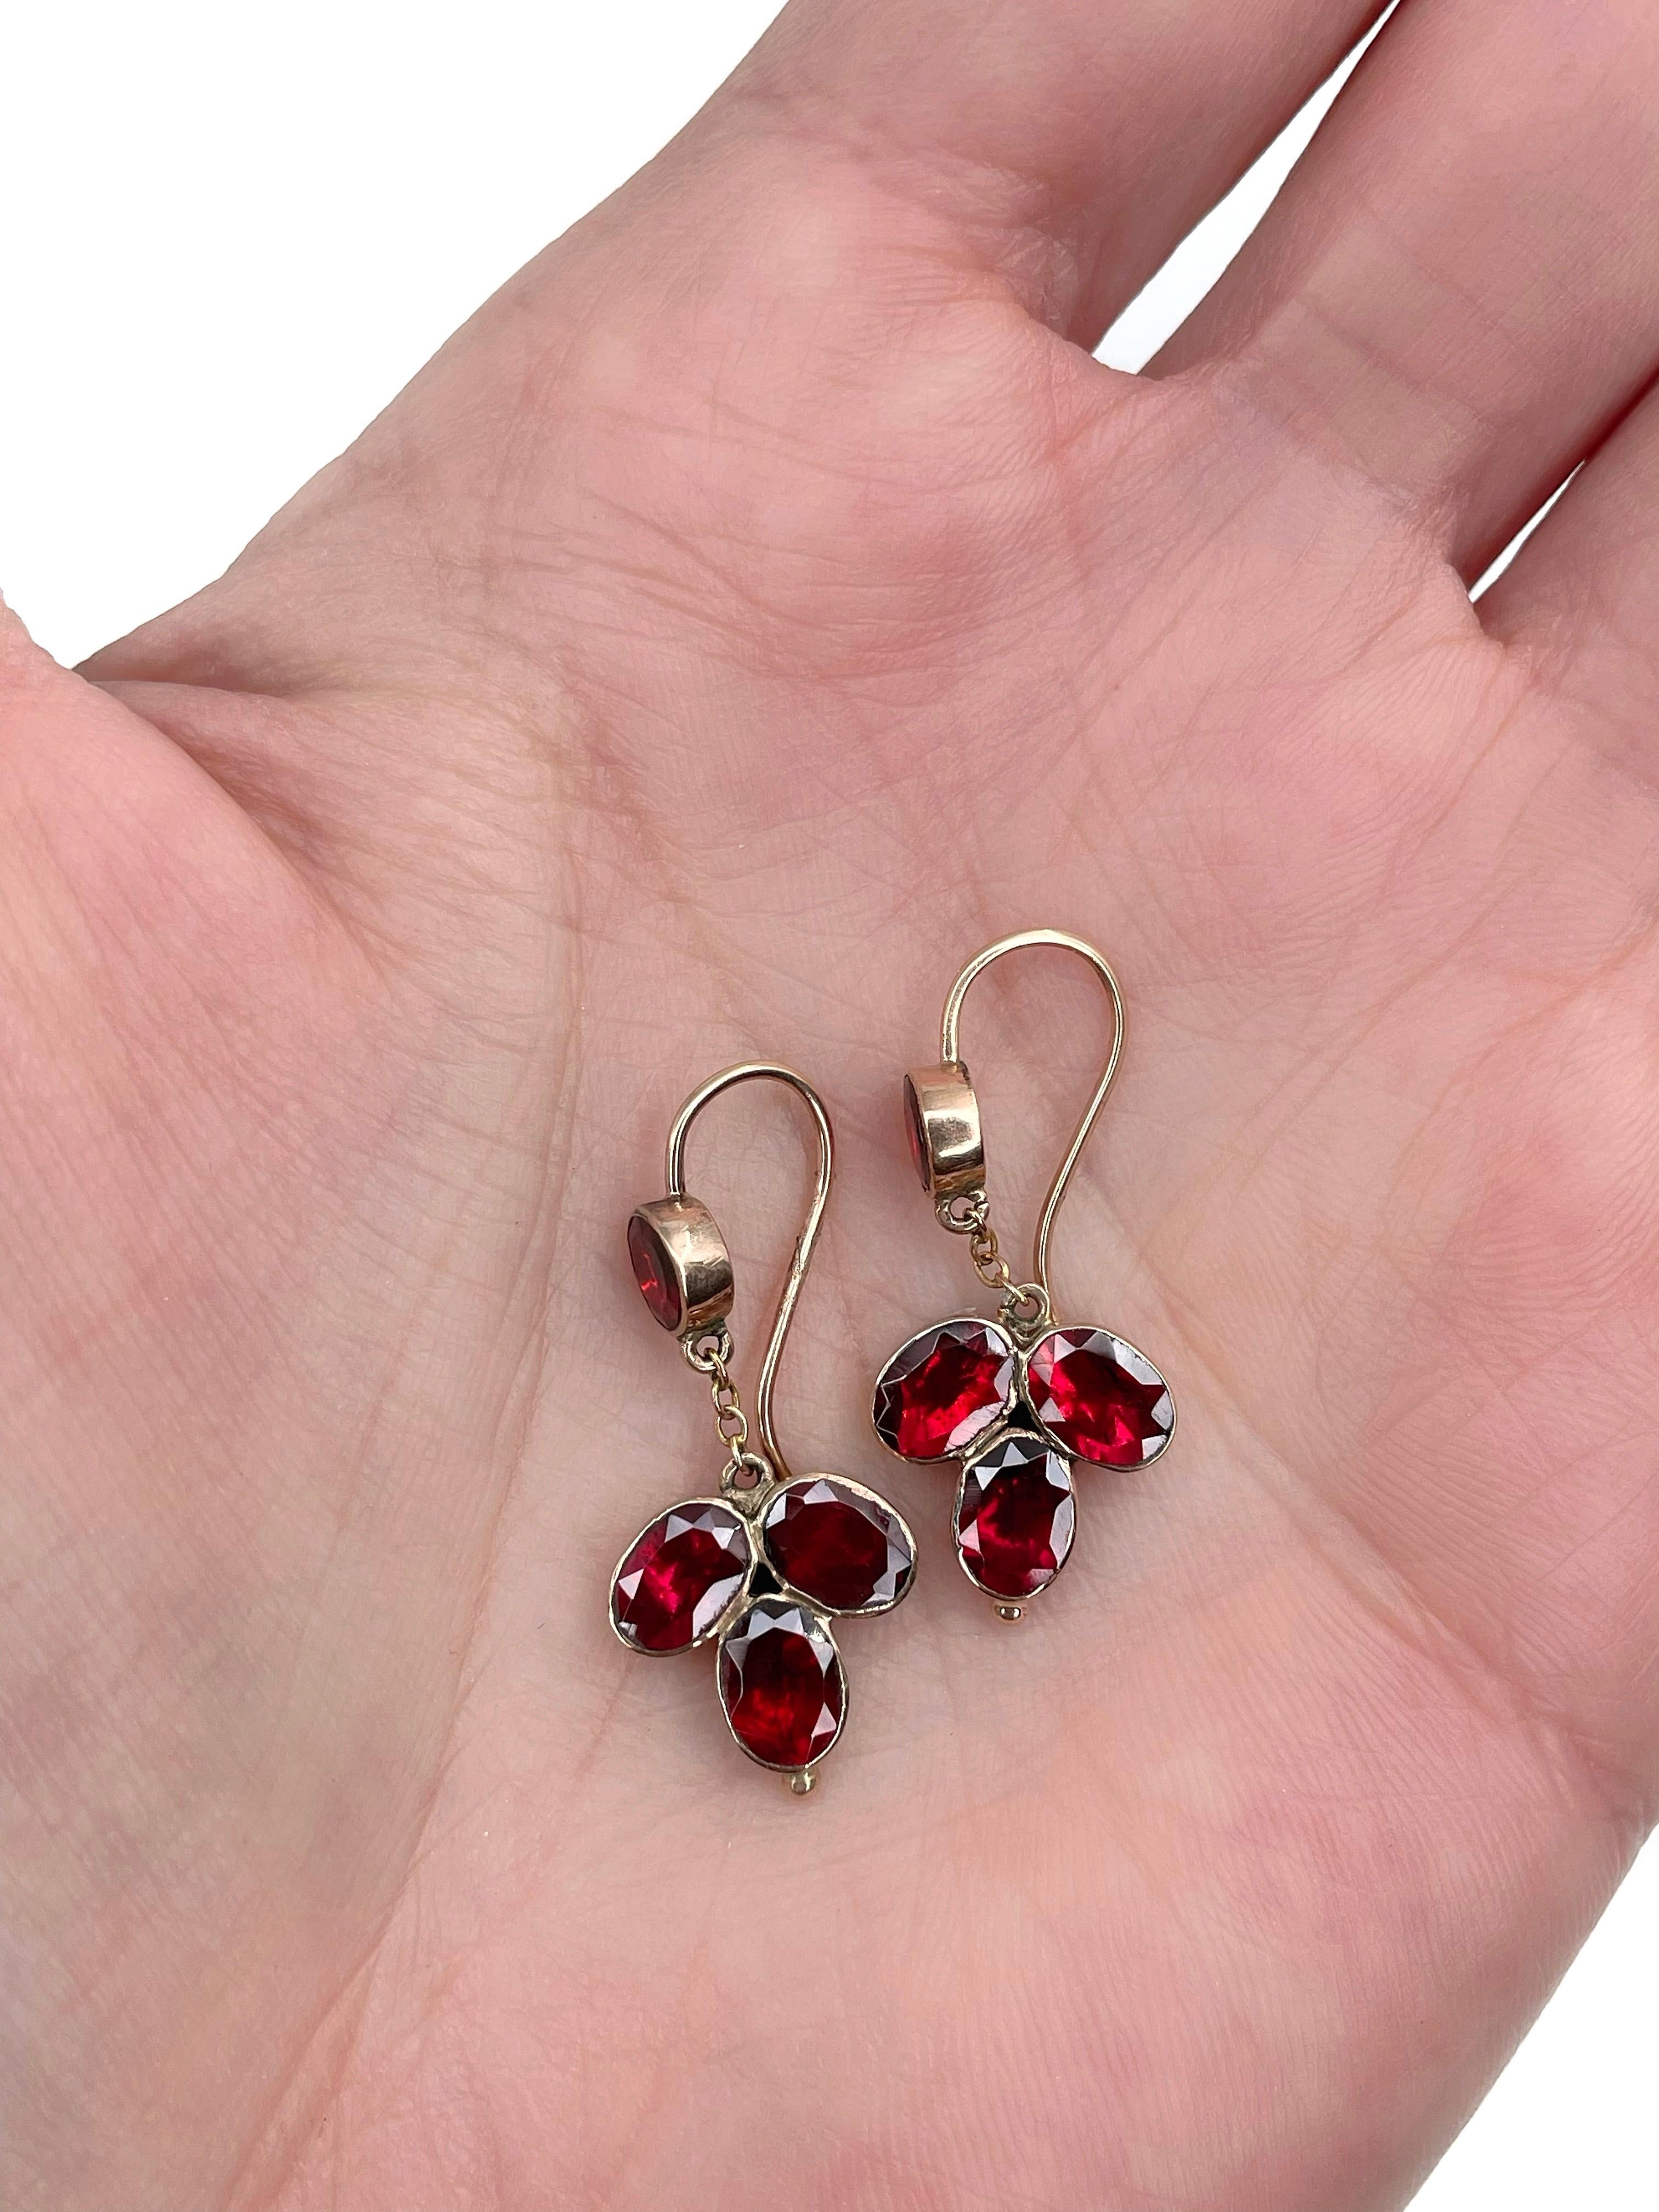 This is a pair of Victorian dangle earrings crafted in 9K yellow gold. Circa 1900. 

The piece features beautiful red round and oval shape garnets. 

Weight: 2.29g
Length: 3cm

———

If you have any questions, please feel free to ask. We describe our